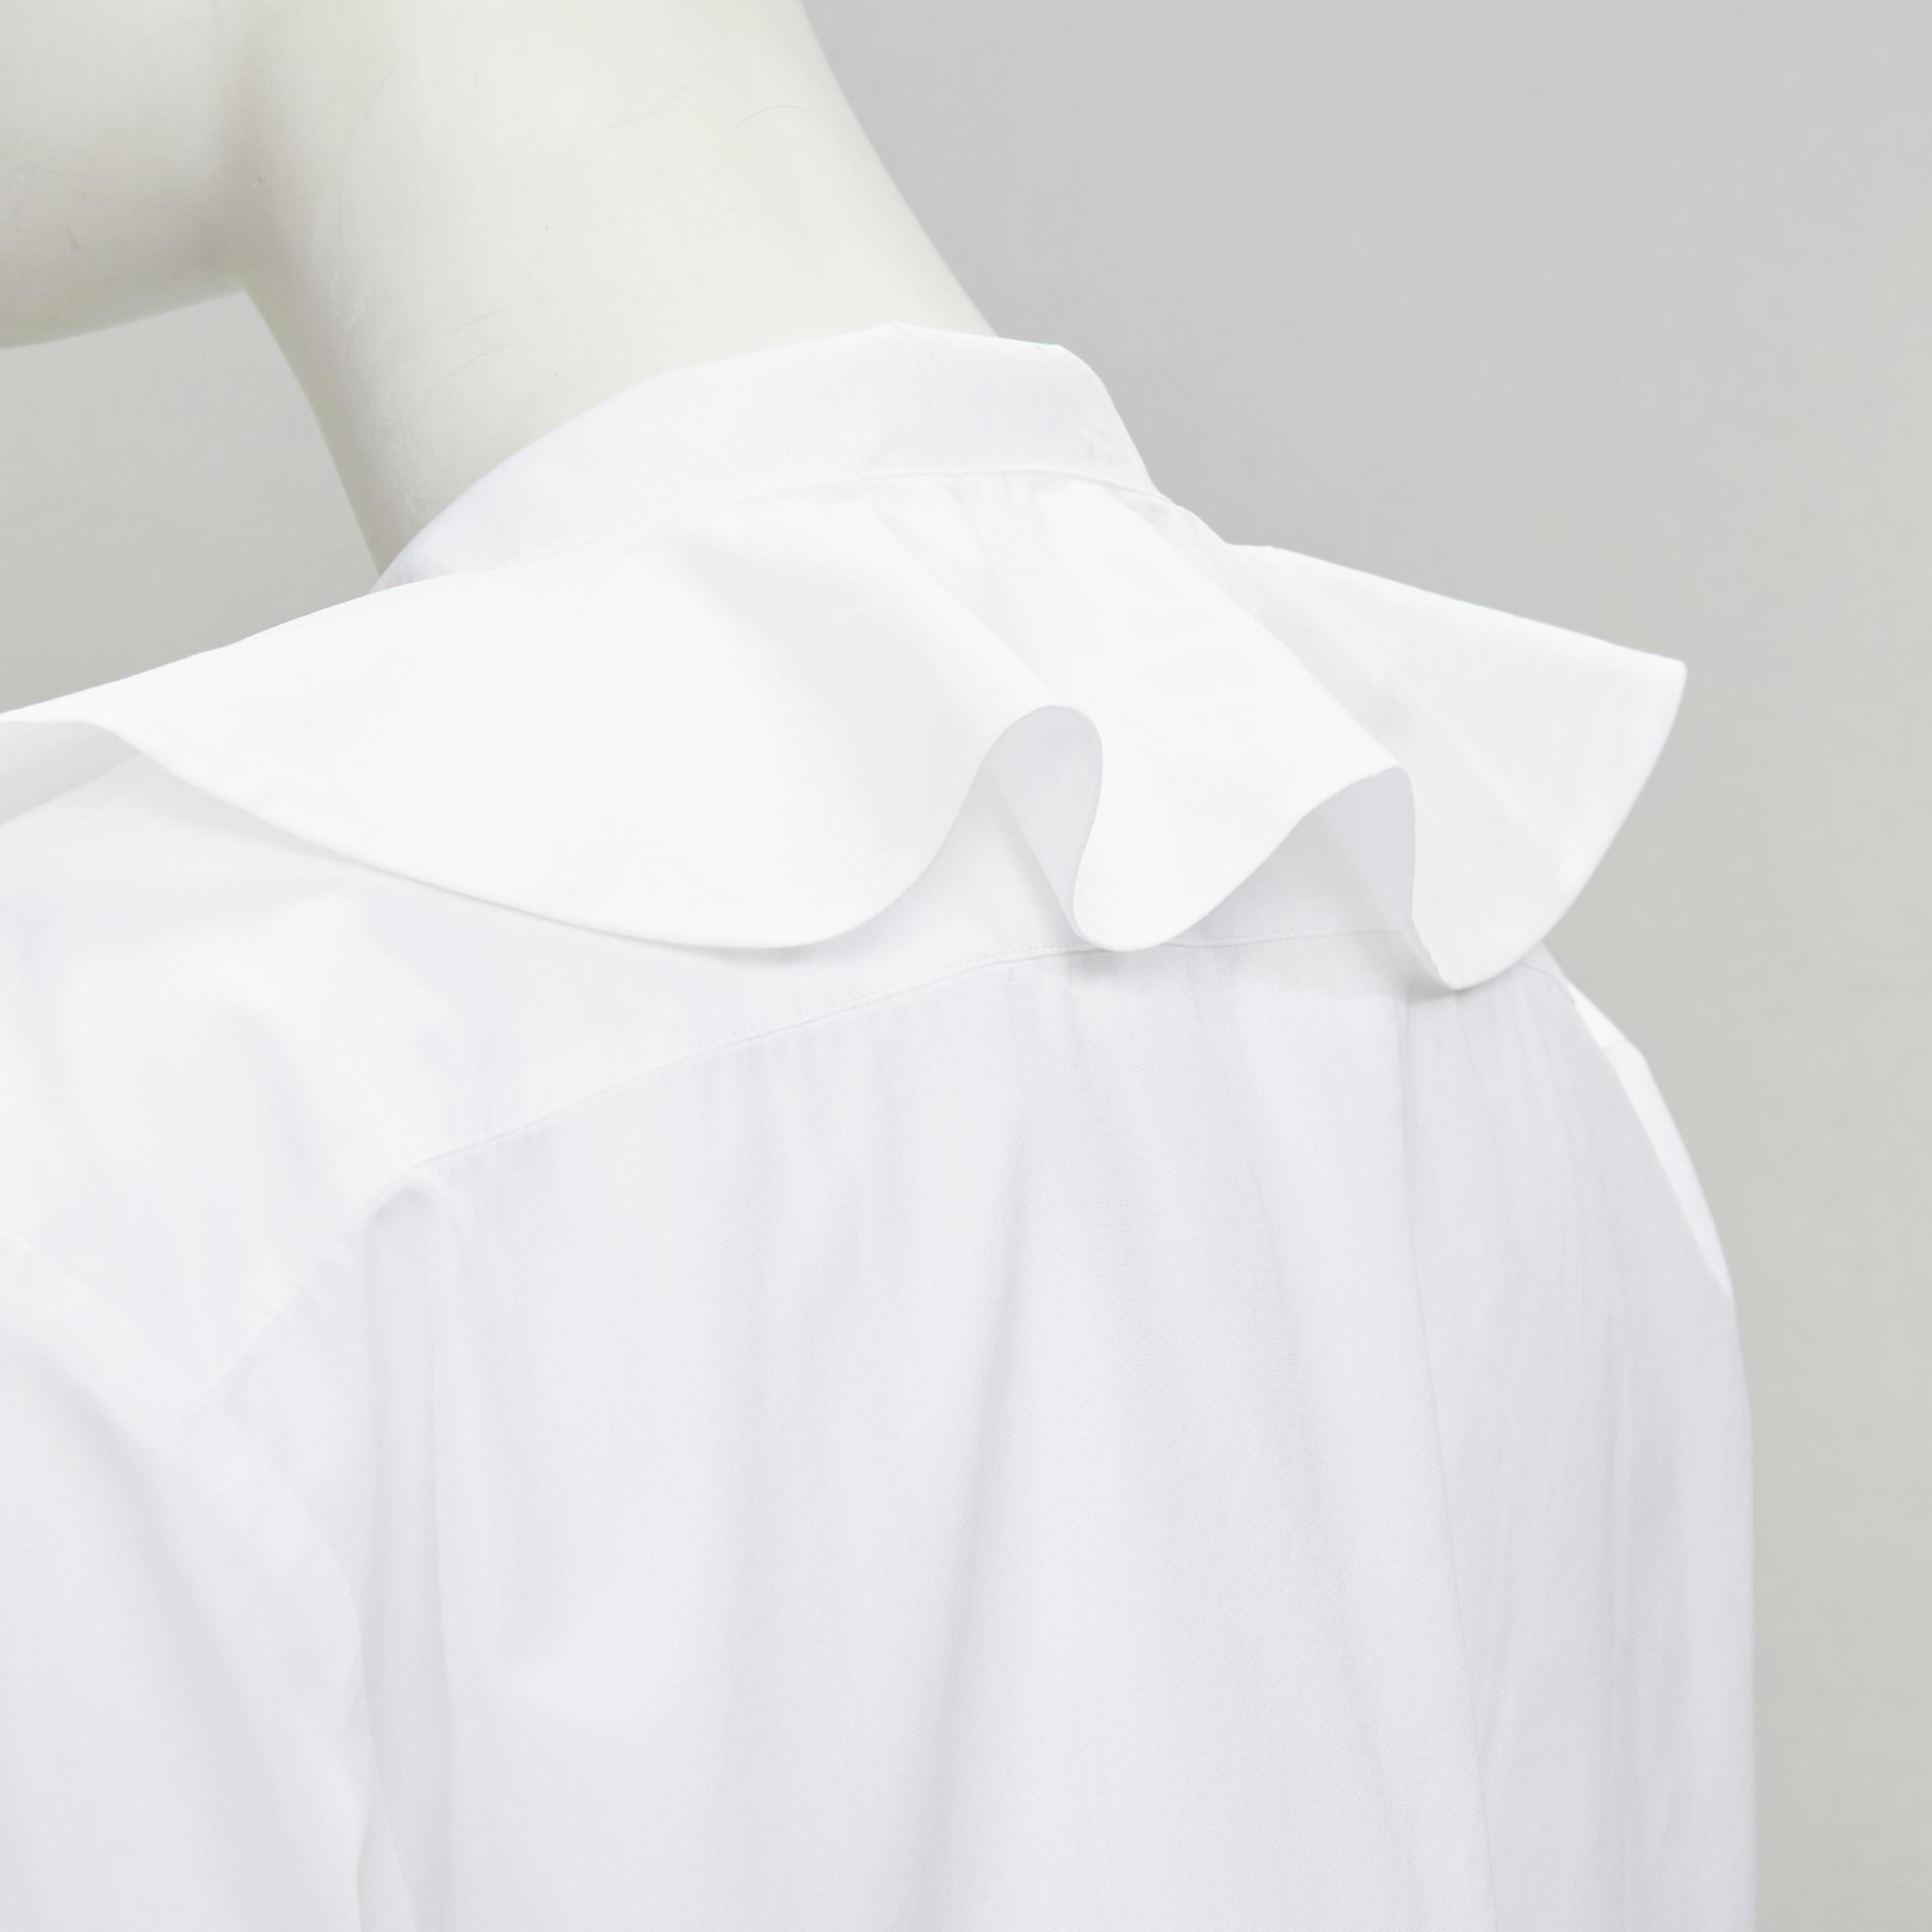 CHANEL white cotton gold pearl CC button double pocket boxy cropped shirt FR40 M
Brand: Chanel
Material: Cotton
Color: White
Pattern: Solid
Closure: Button
Extra Detail: Gold-tone faux pearl CC button at collar. Concealed mother-of-pearl button